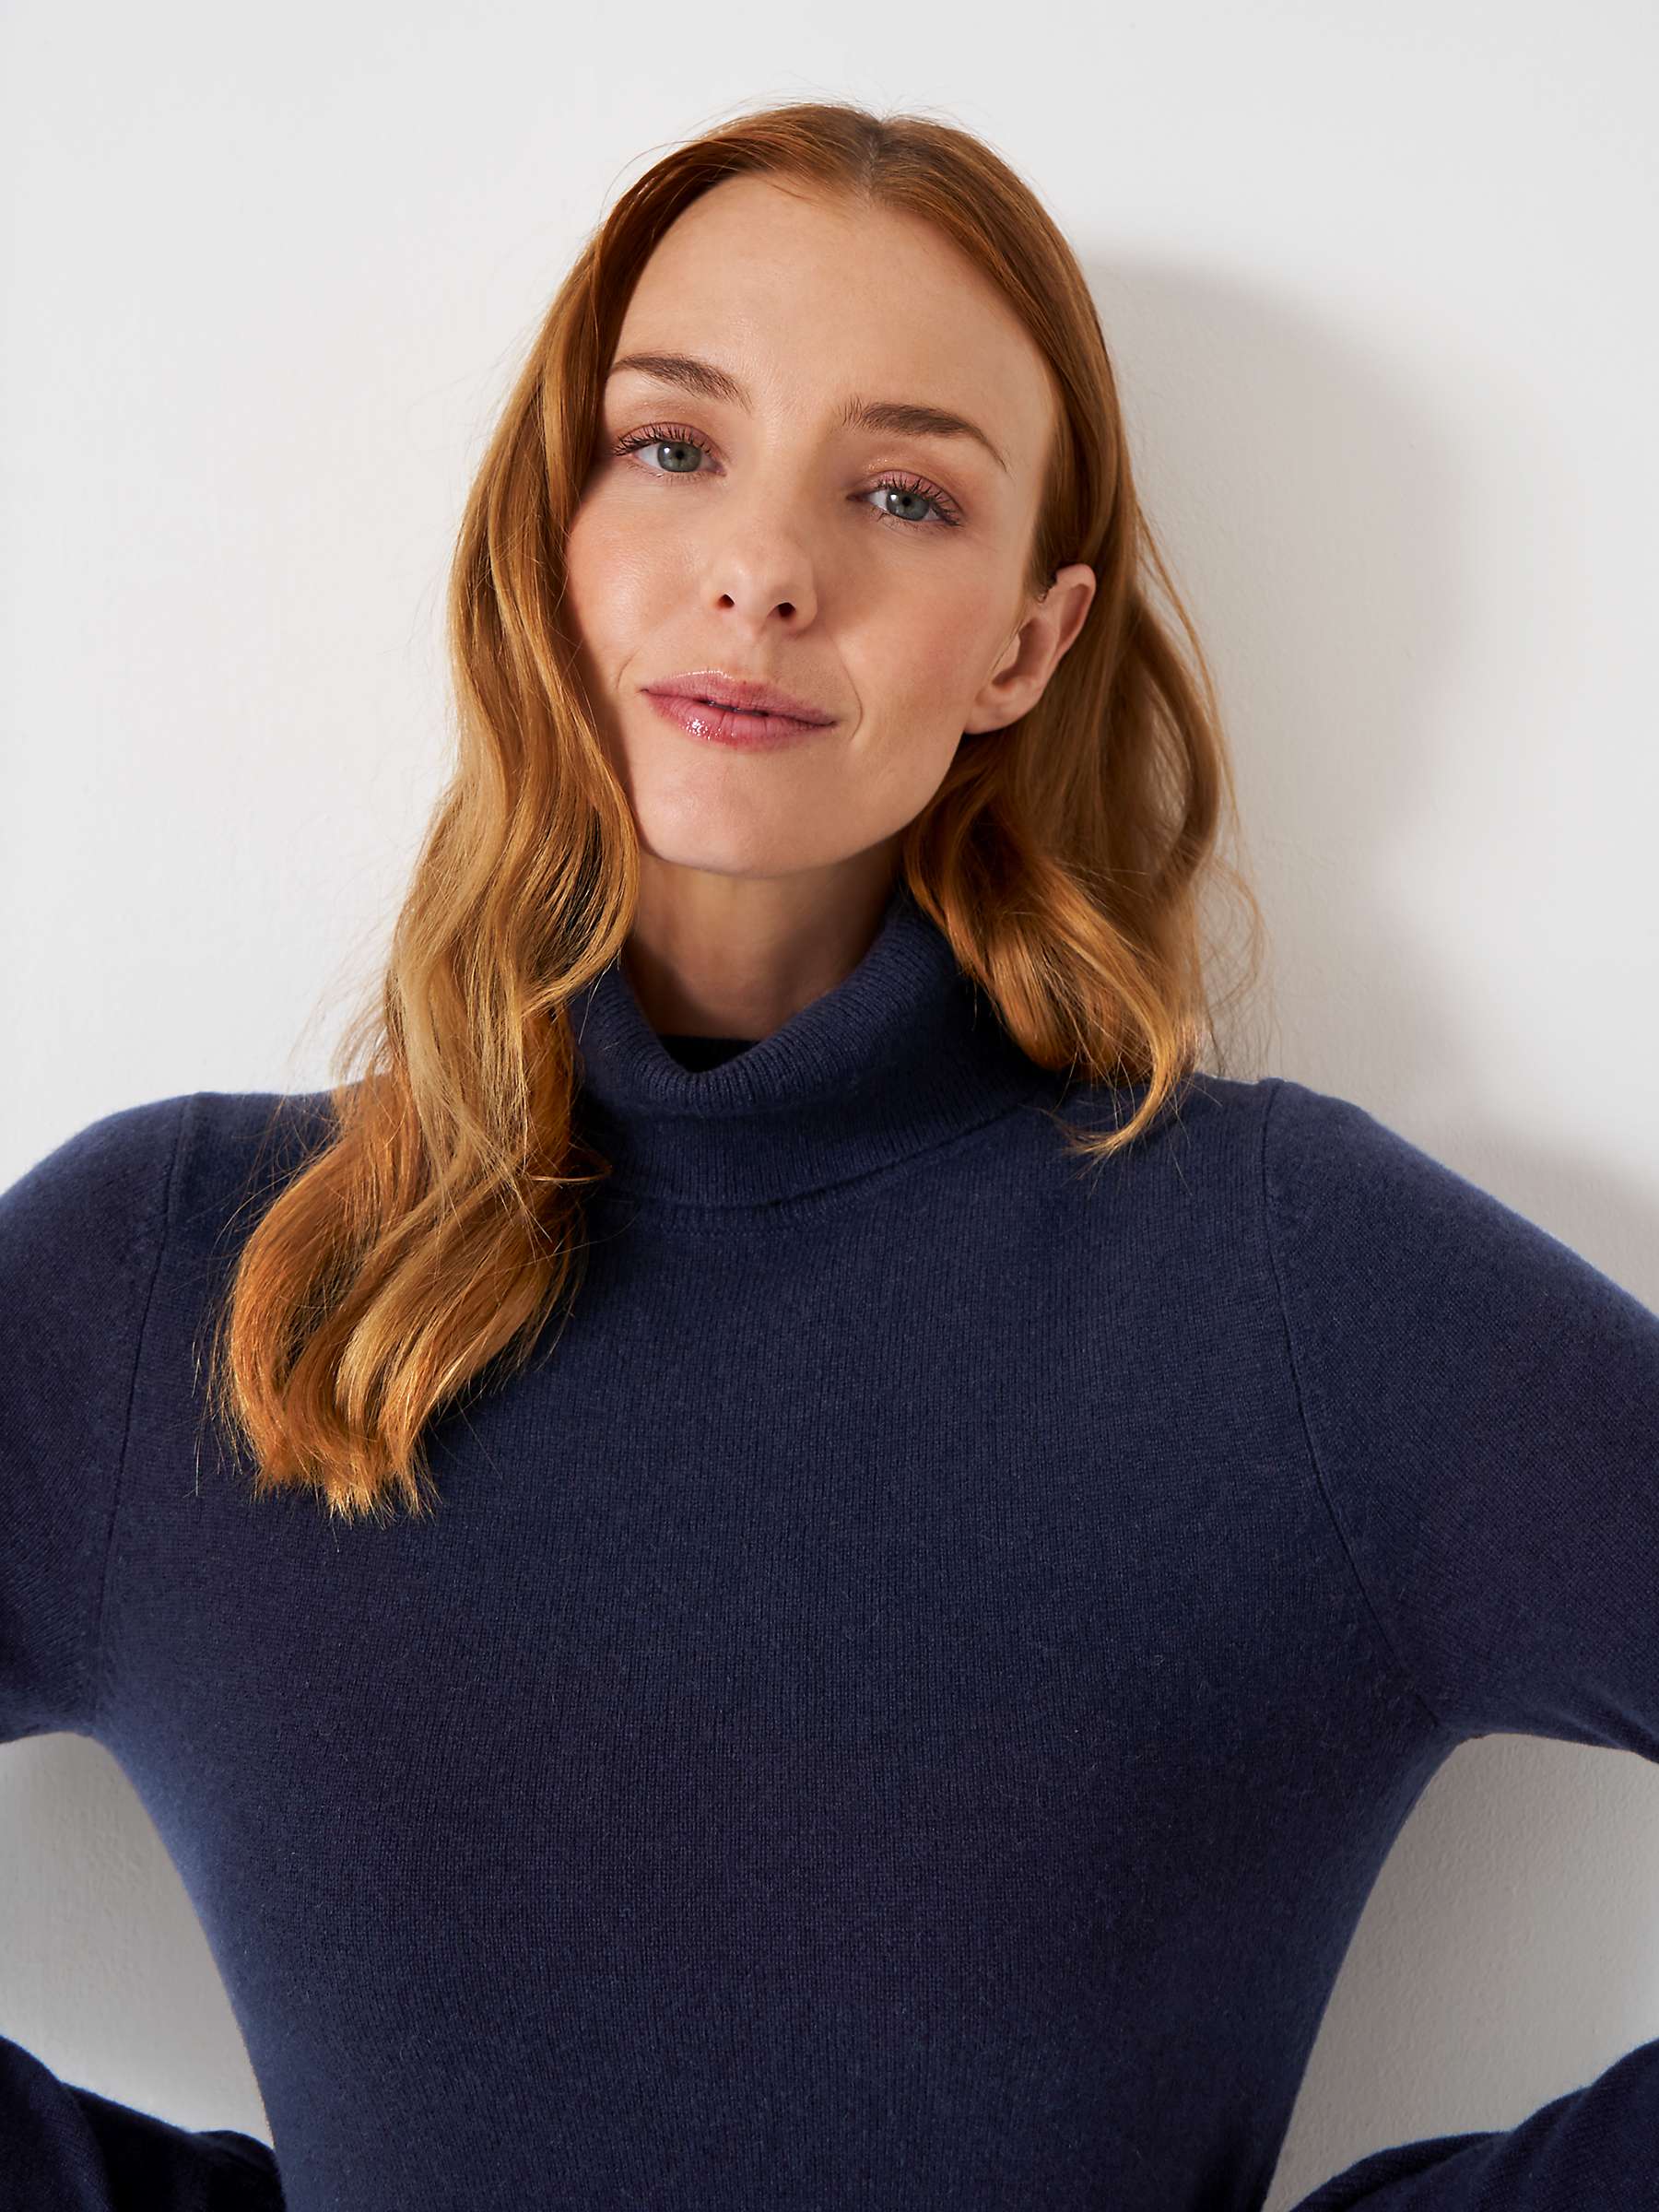 Buy Crew Clothing Cashmere Blend Libby Roll Neck Knit Dress, Navy Blue Online at johnlewis.com